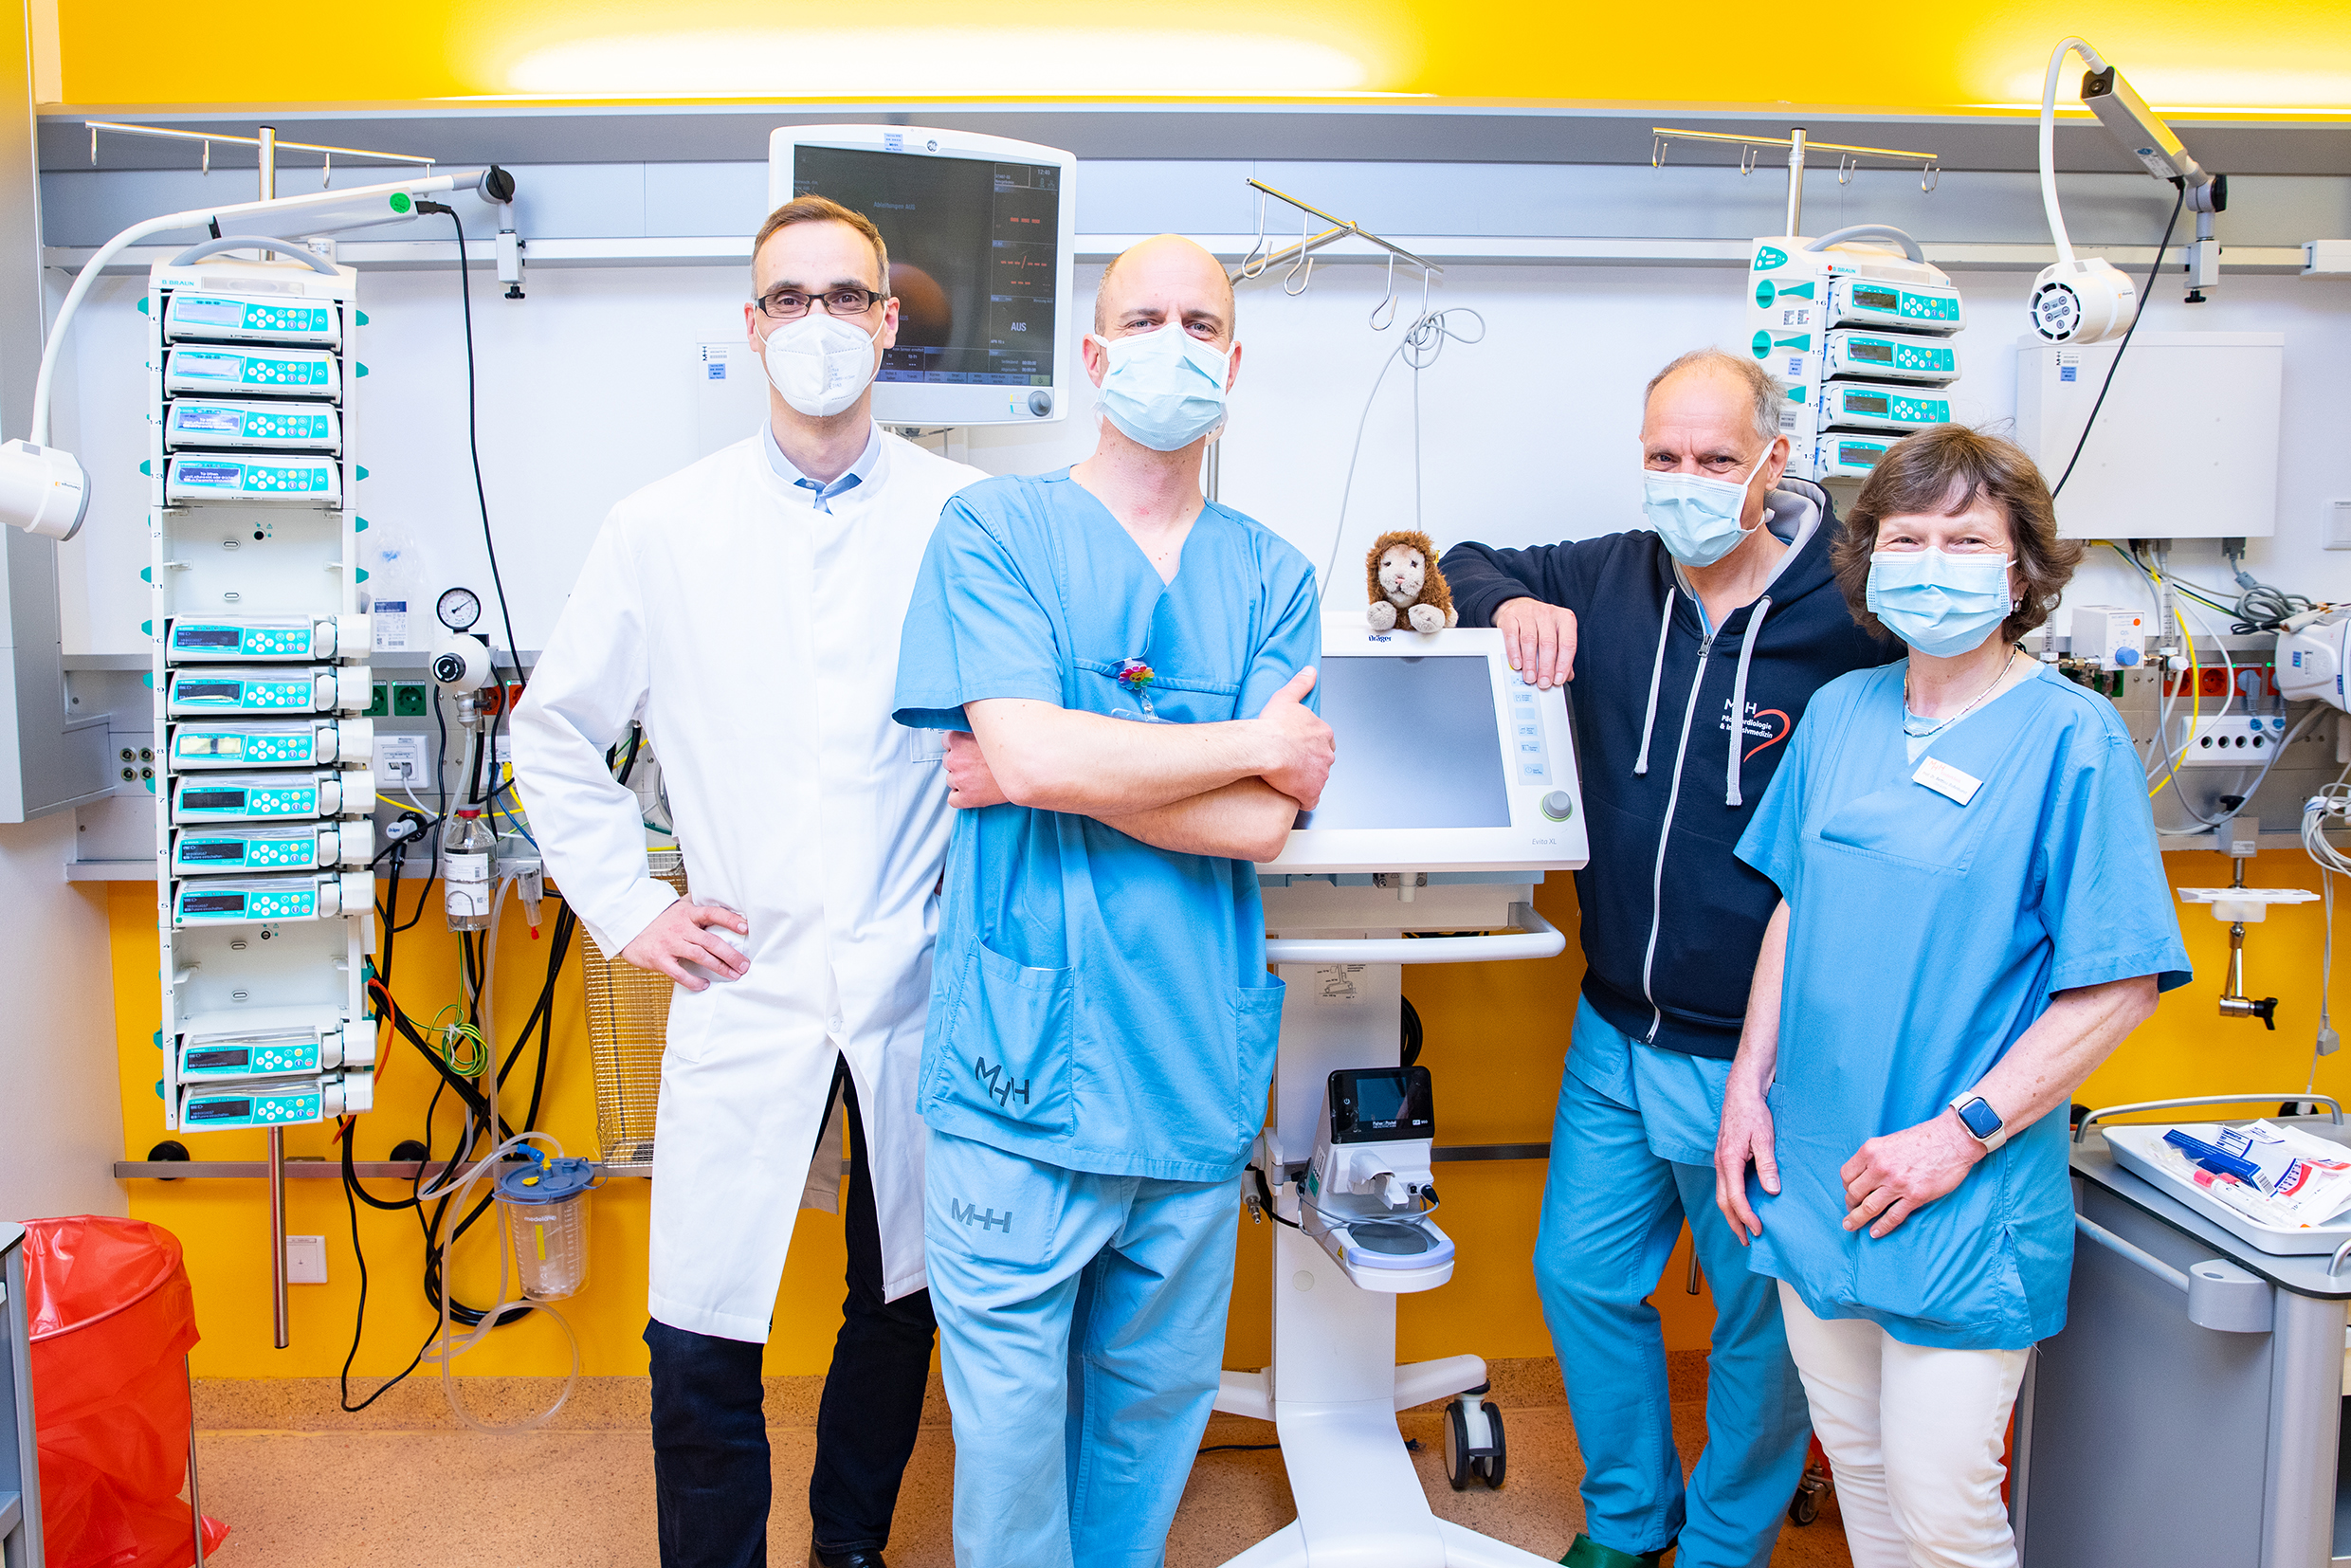 Dr. Bernd Auber, Dr. Alexander von Gise and Dr. Michael Sasse from the intensive care unit and Professor Dr. Bettina Bohnhorst from the neonatology unit stand in a patient room of the pediatric clinic. 